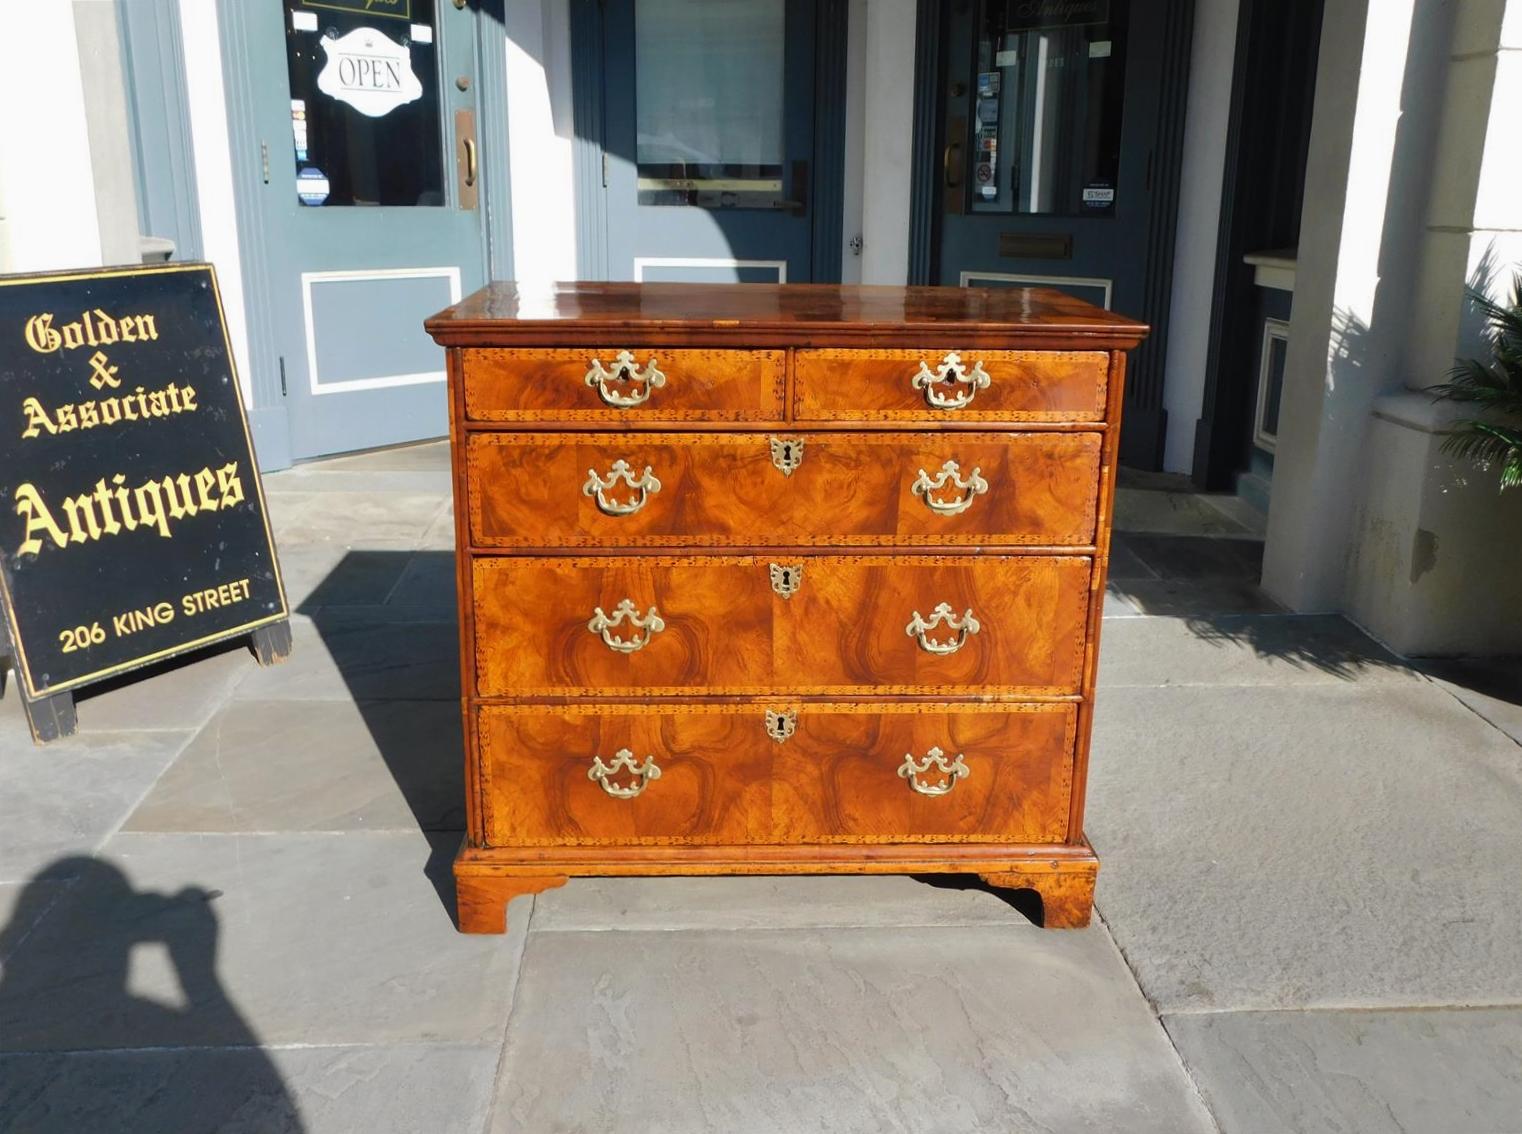 English Georgian rectangular book matched burl walnut graduated chest of drawers with satinwood feather bandings and ebony checkered inlays, period foliate brasses with escutcheons, and resting on the original bracket feet. Mid 18th century.